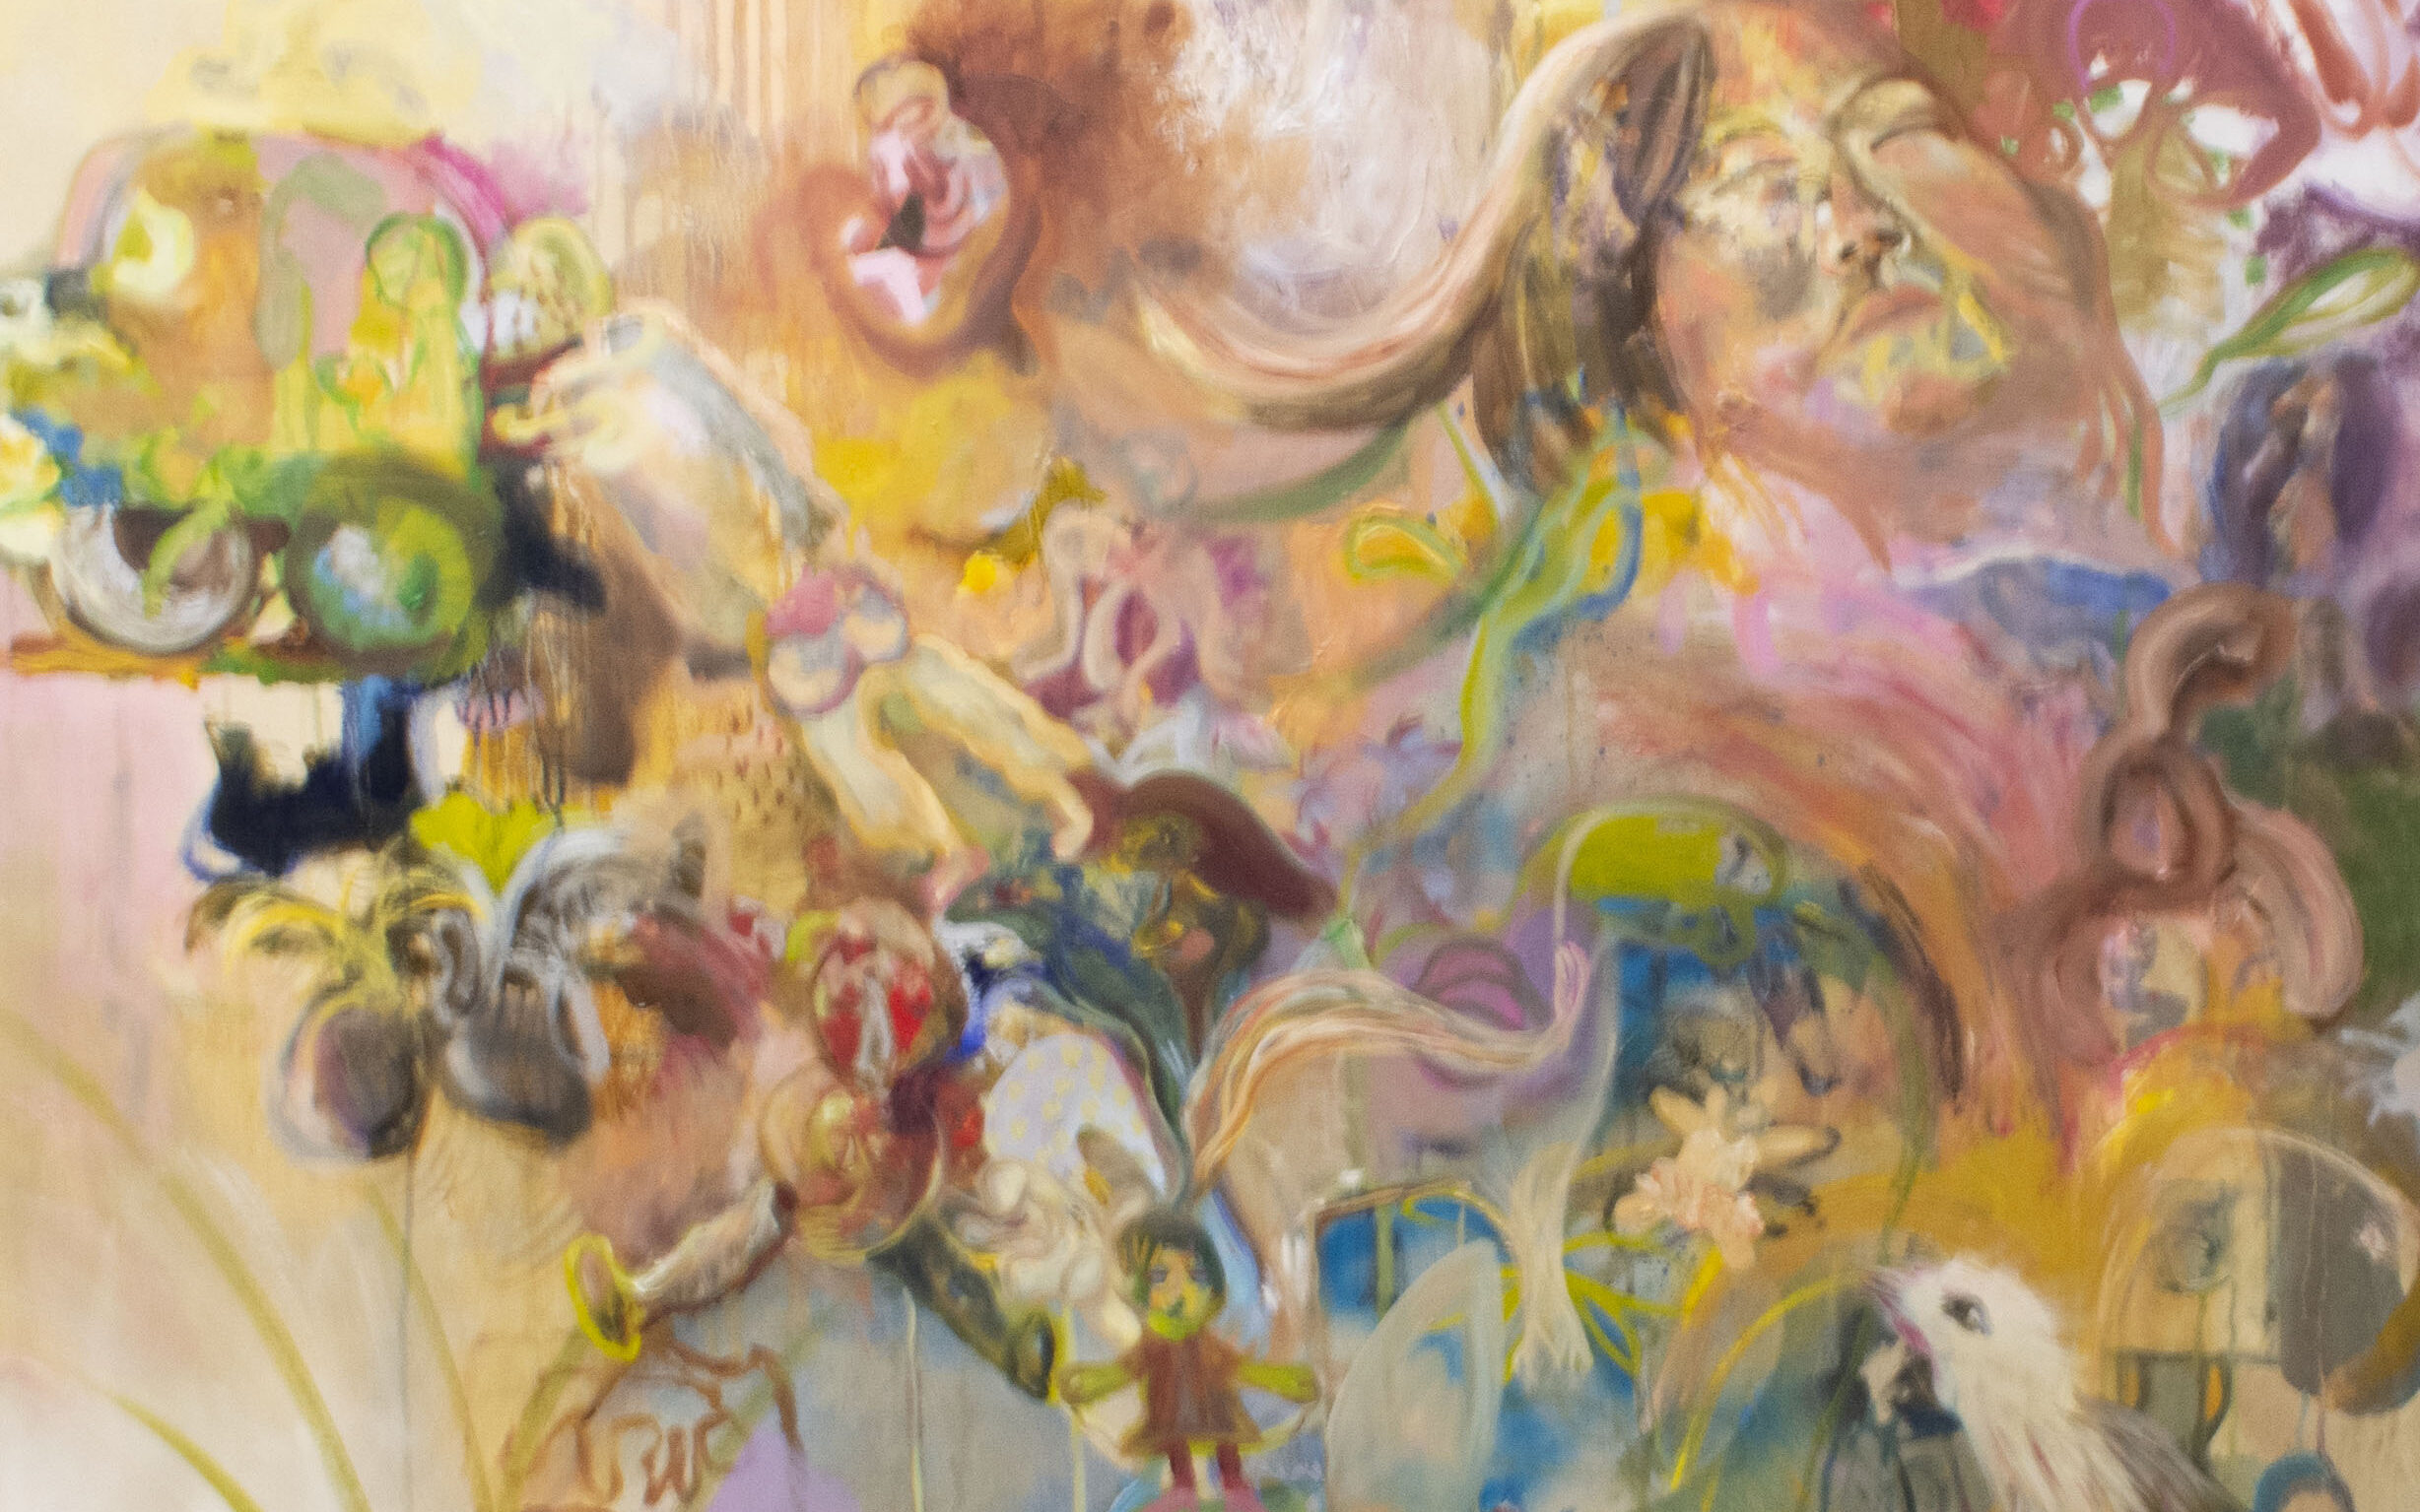 Painting with busy swirls of color on a yellow-peach background. There are bright colors in the center of peach, pink, green, yellow, red, blue, and brown. Figures and shapes emerge from the colors.